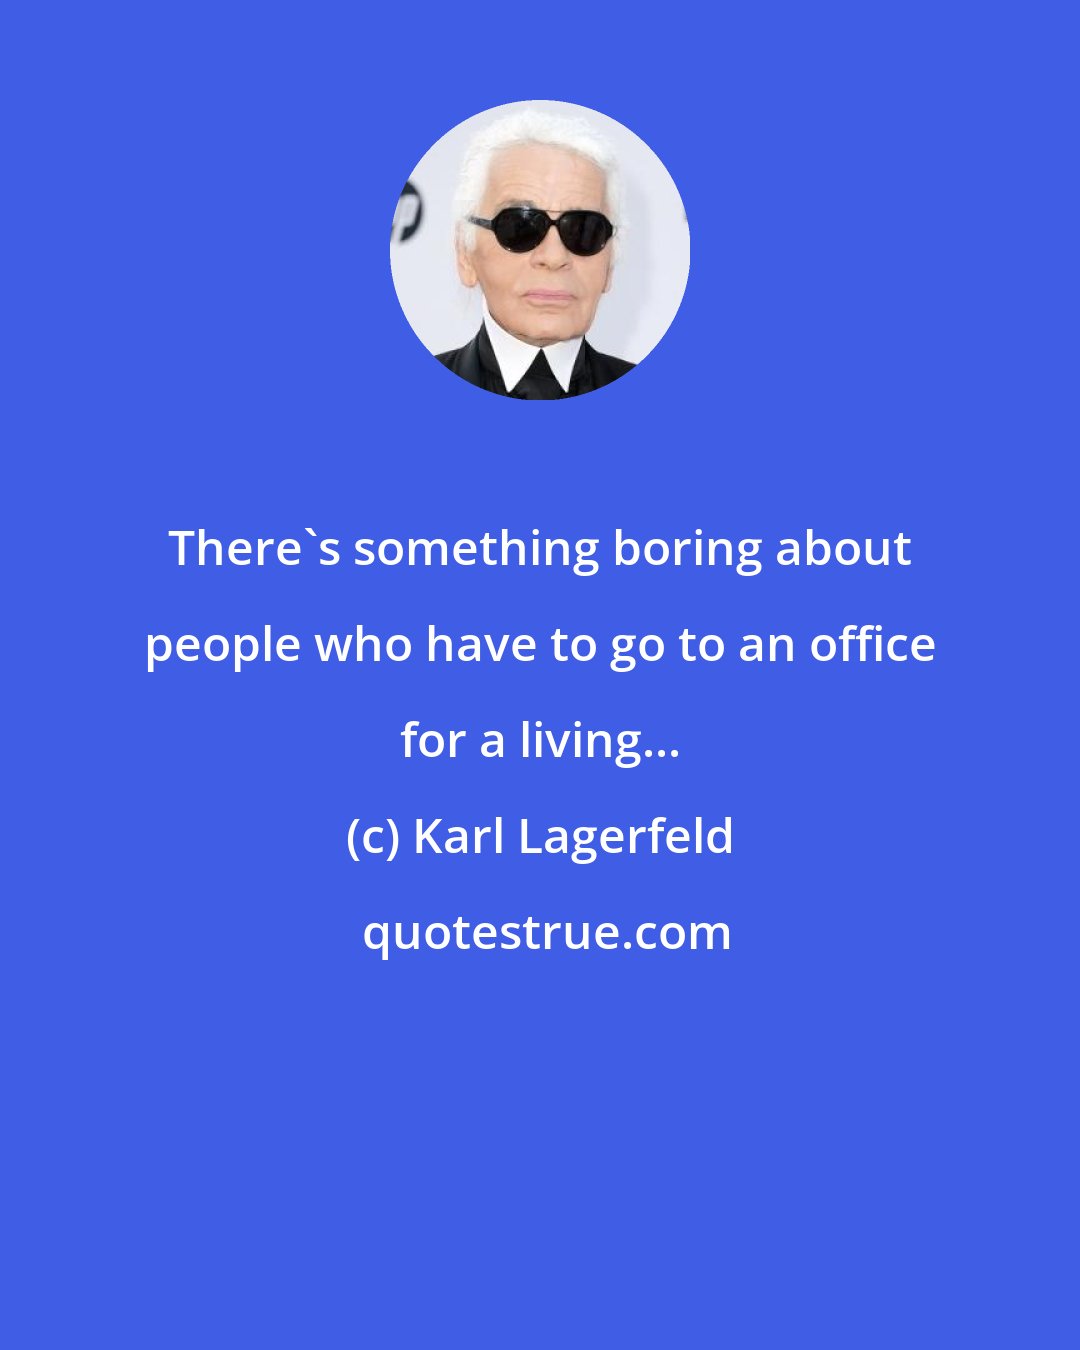 Karl Lagerfeld: There's something boring about people who have to go to an office for a living...